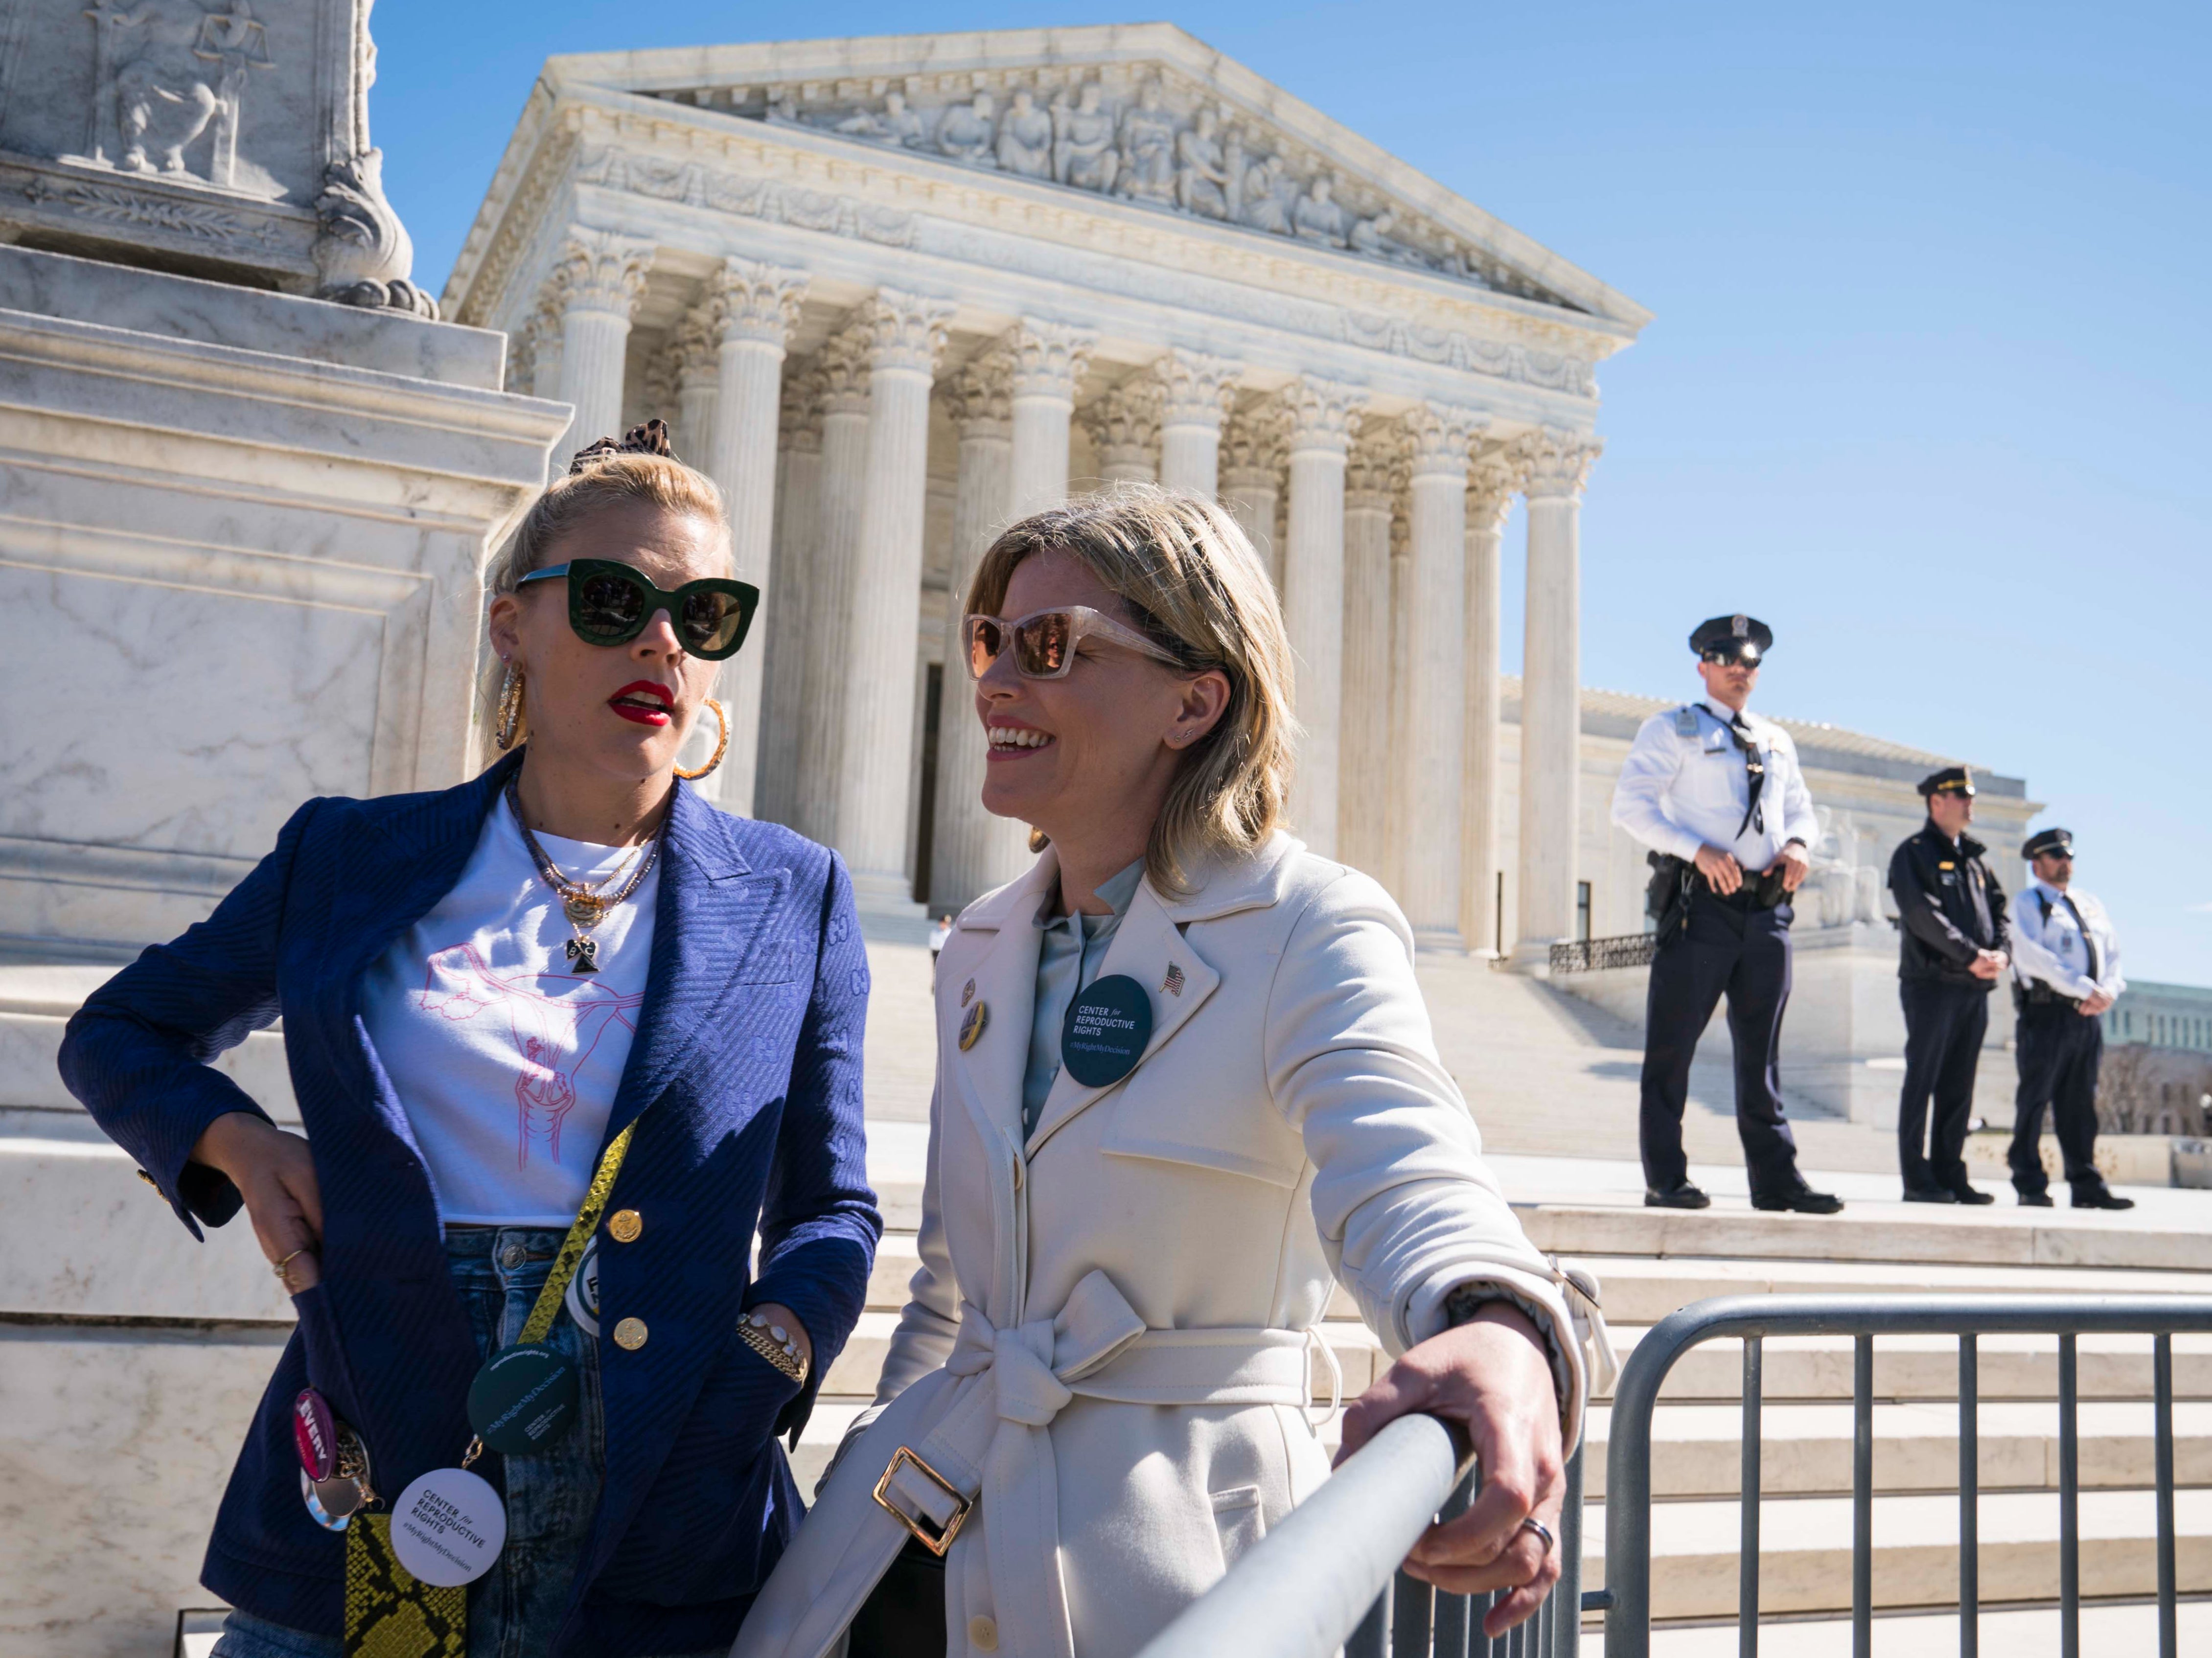 Busy Philipps and Elizabeth Banks participate in an abortion rights rally outside of the Supreme Court on 4 March 2020 in Washington, DC. Busy Philips is one of many celebrities who have opened up about having received an abortion, and Elizabeth Banks has been an advocate for reproductive rights